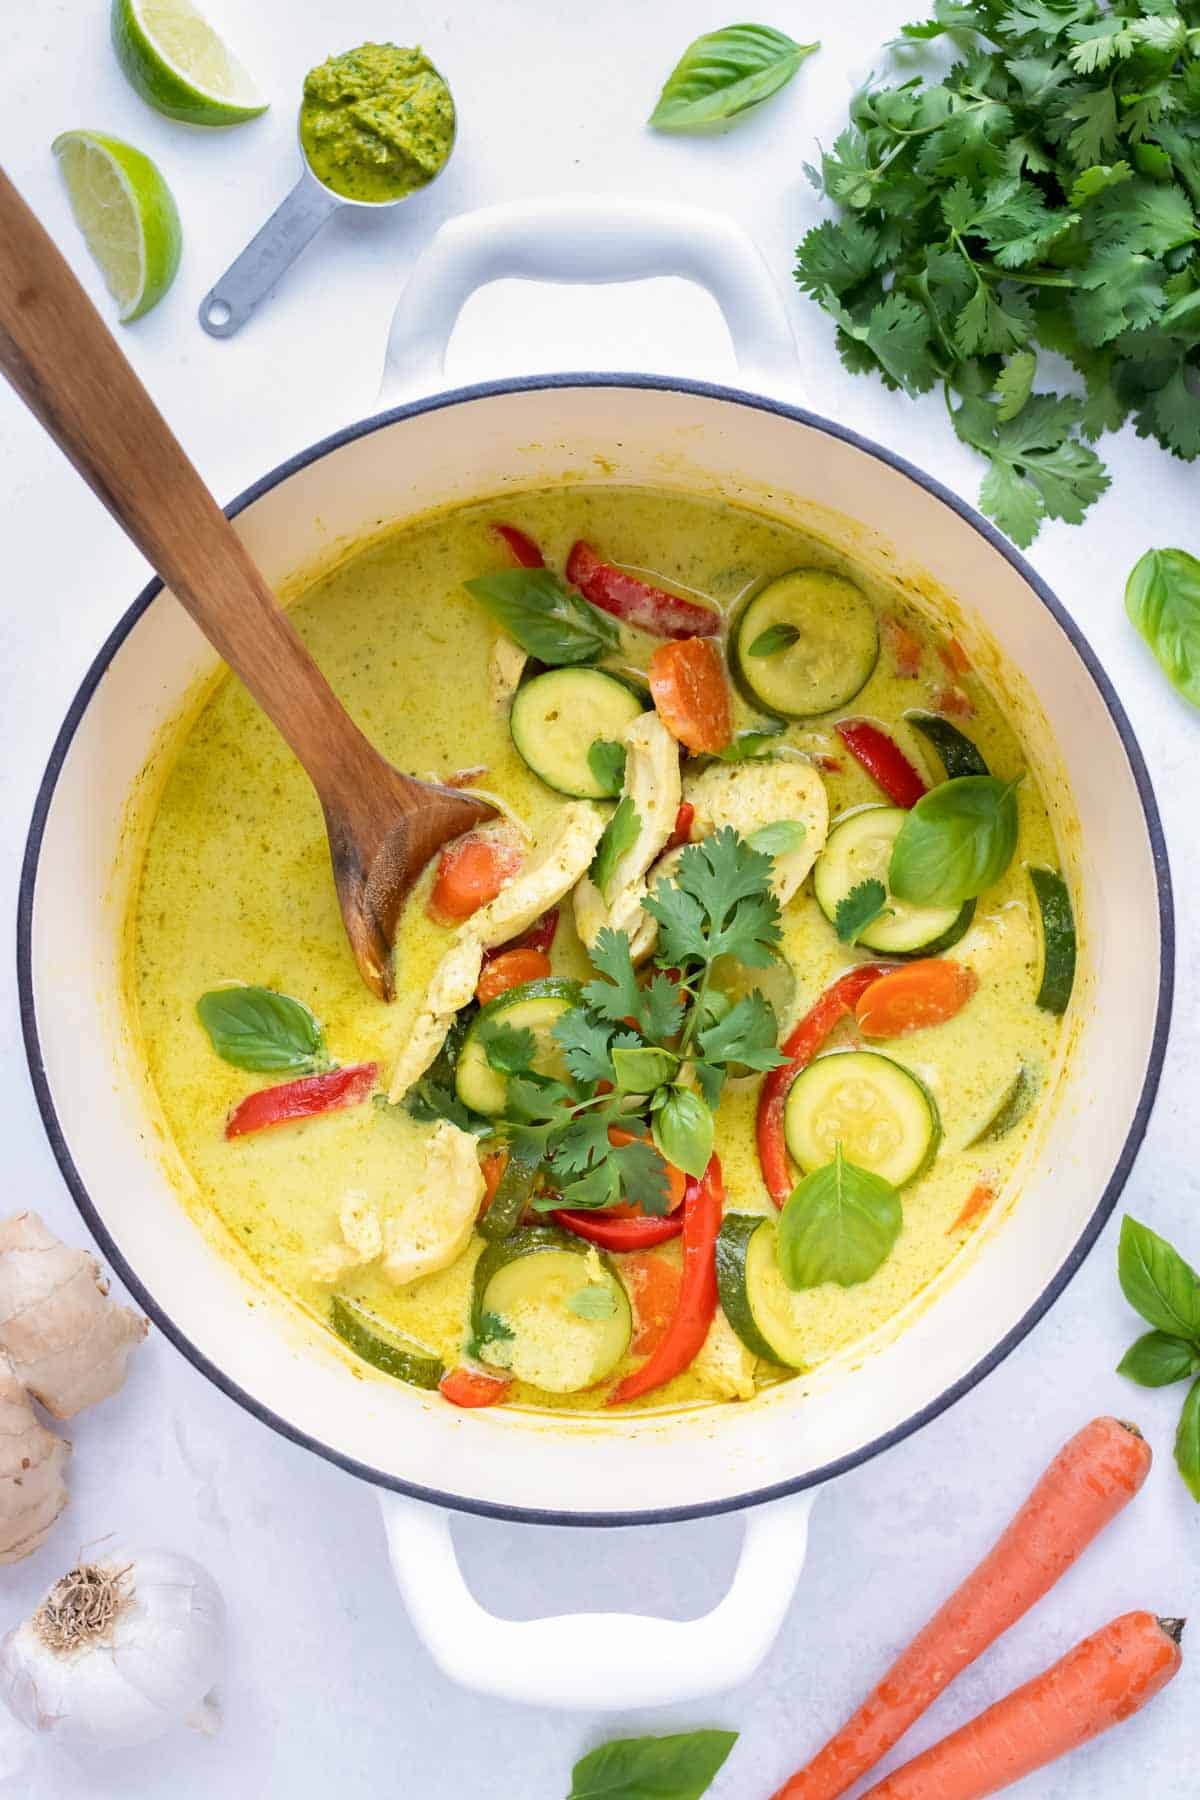 This spicy Thai Green Chicken Curry is made in a dutch oven on the stove.